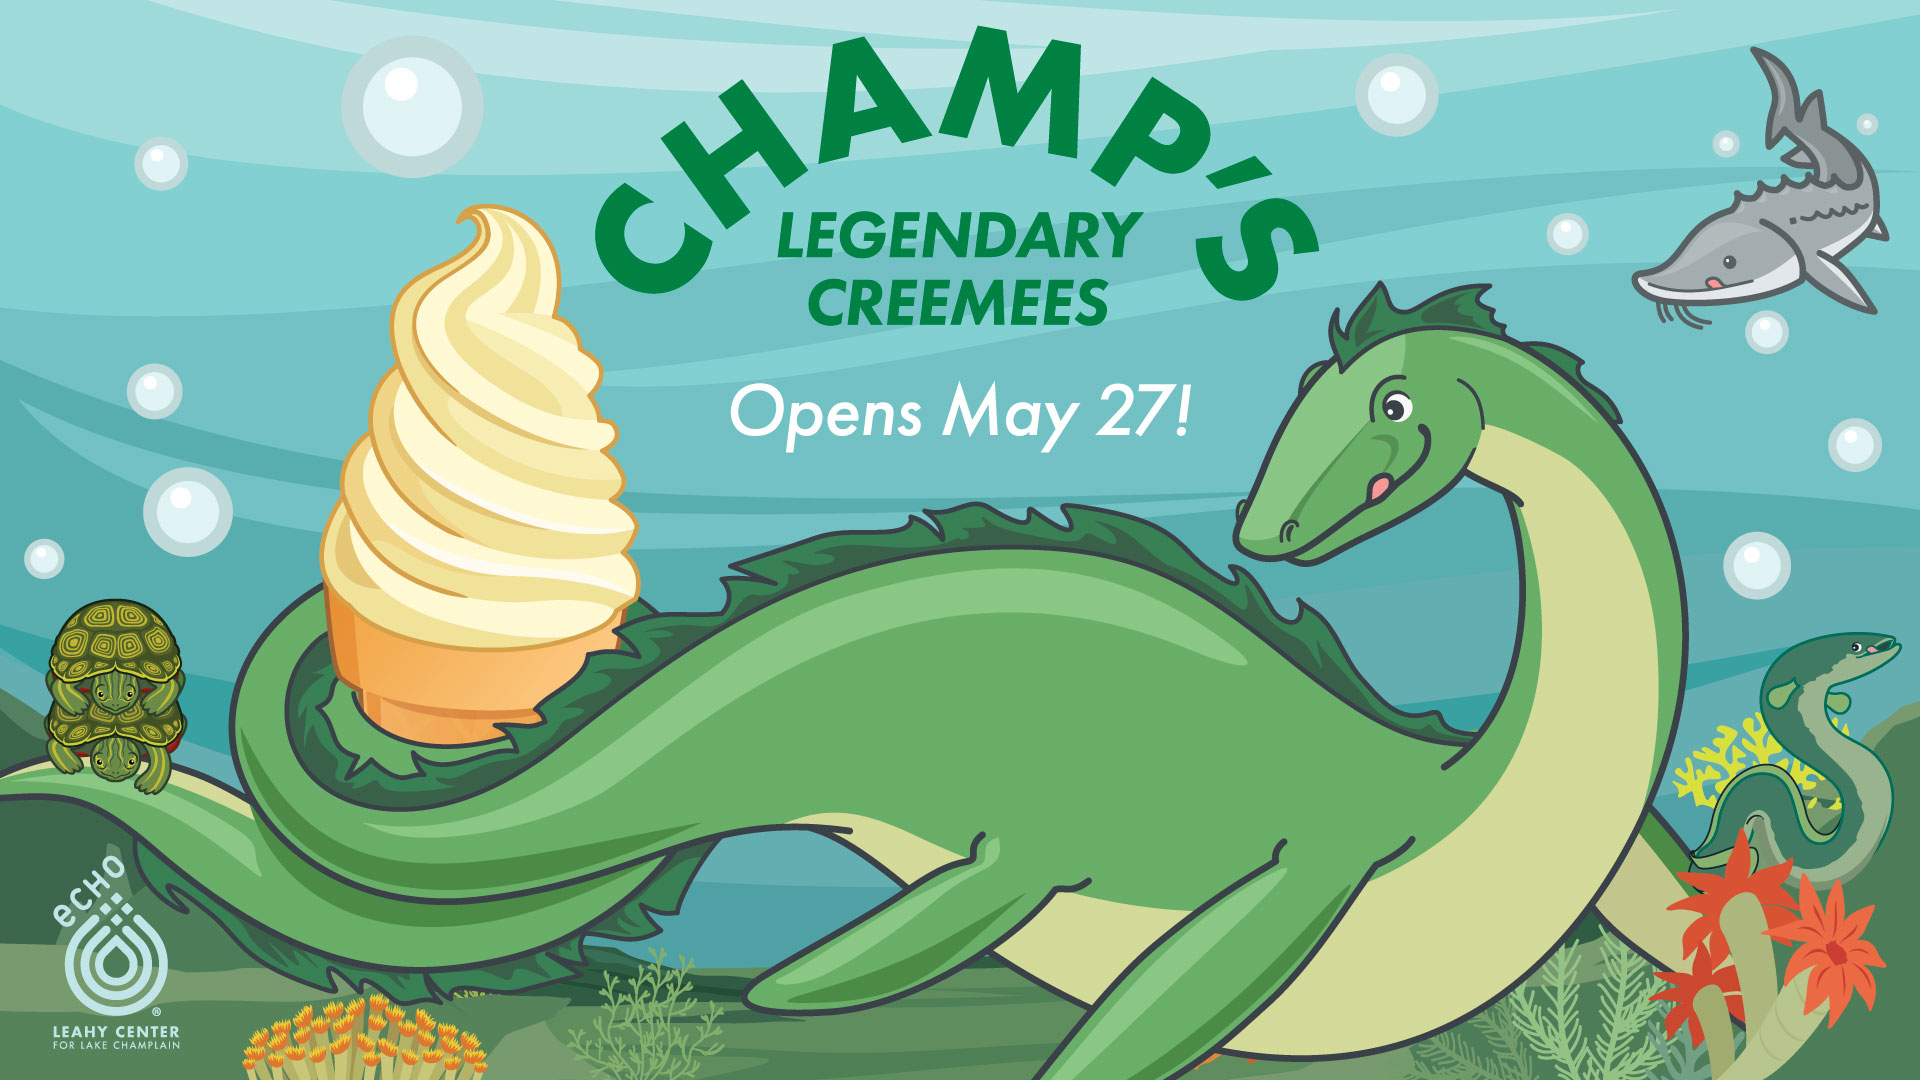 Champ's Legendary Creemees, Opens May 27!